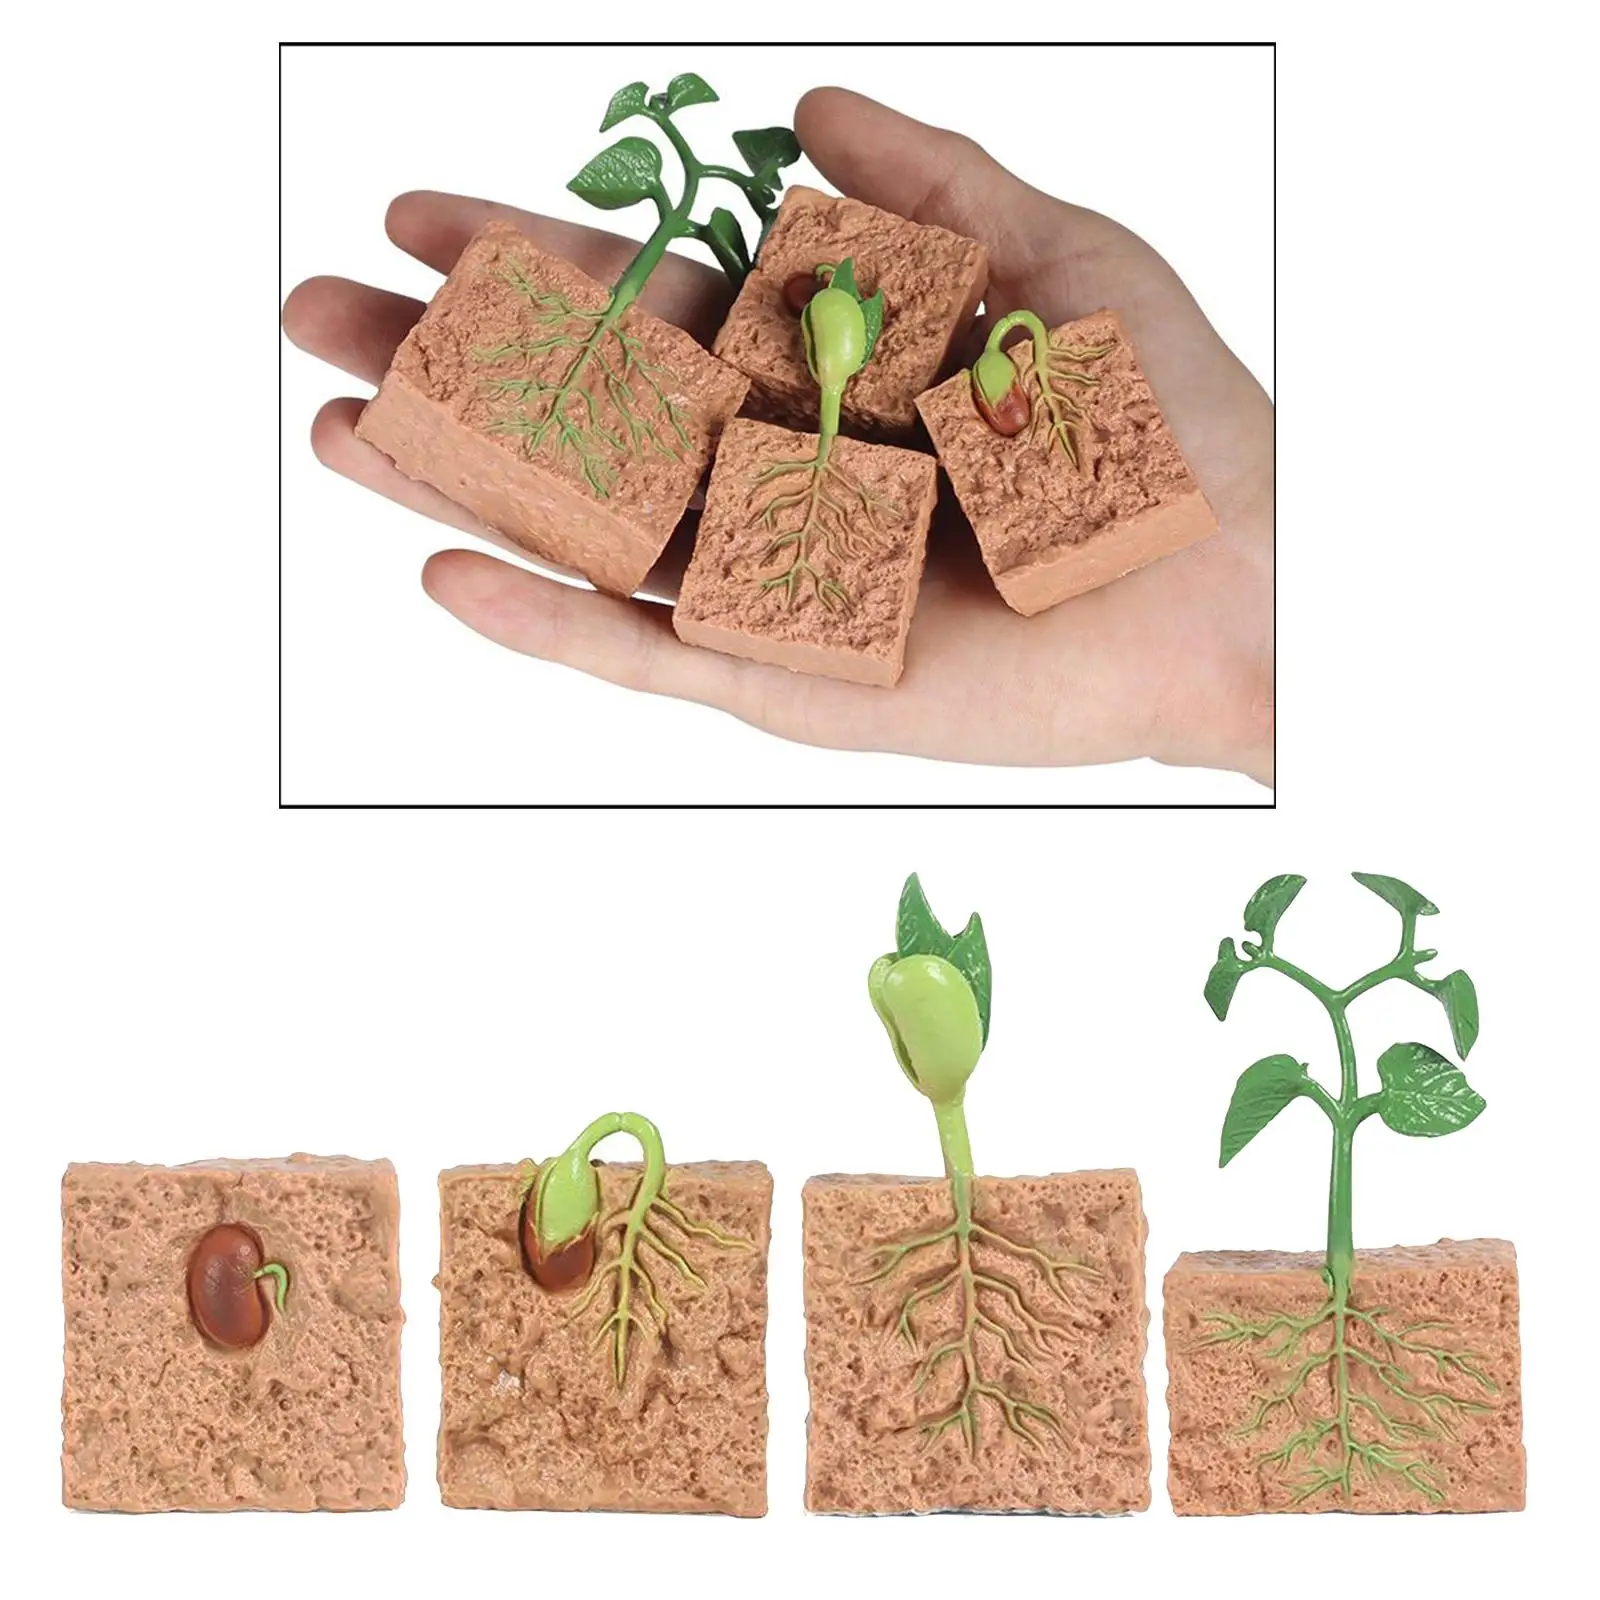 Plant  Growth Cycle Playset Education Learning Biology Toys